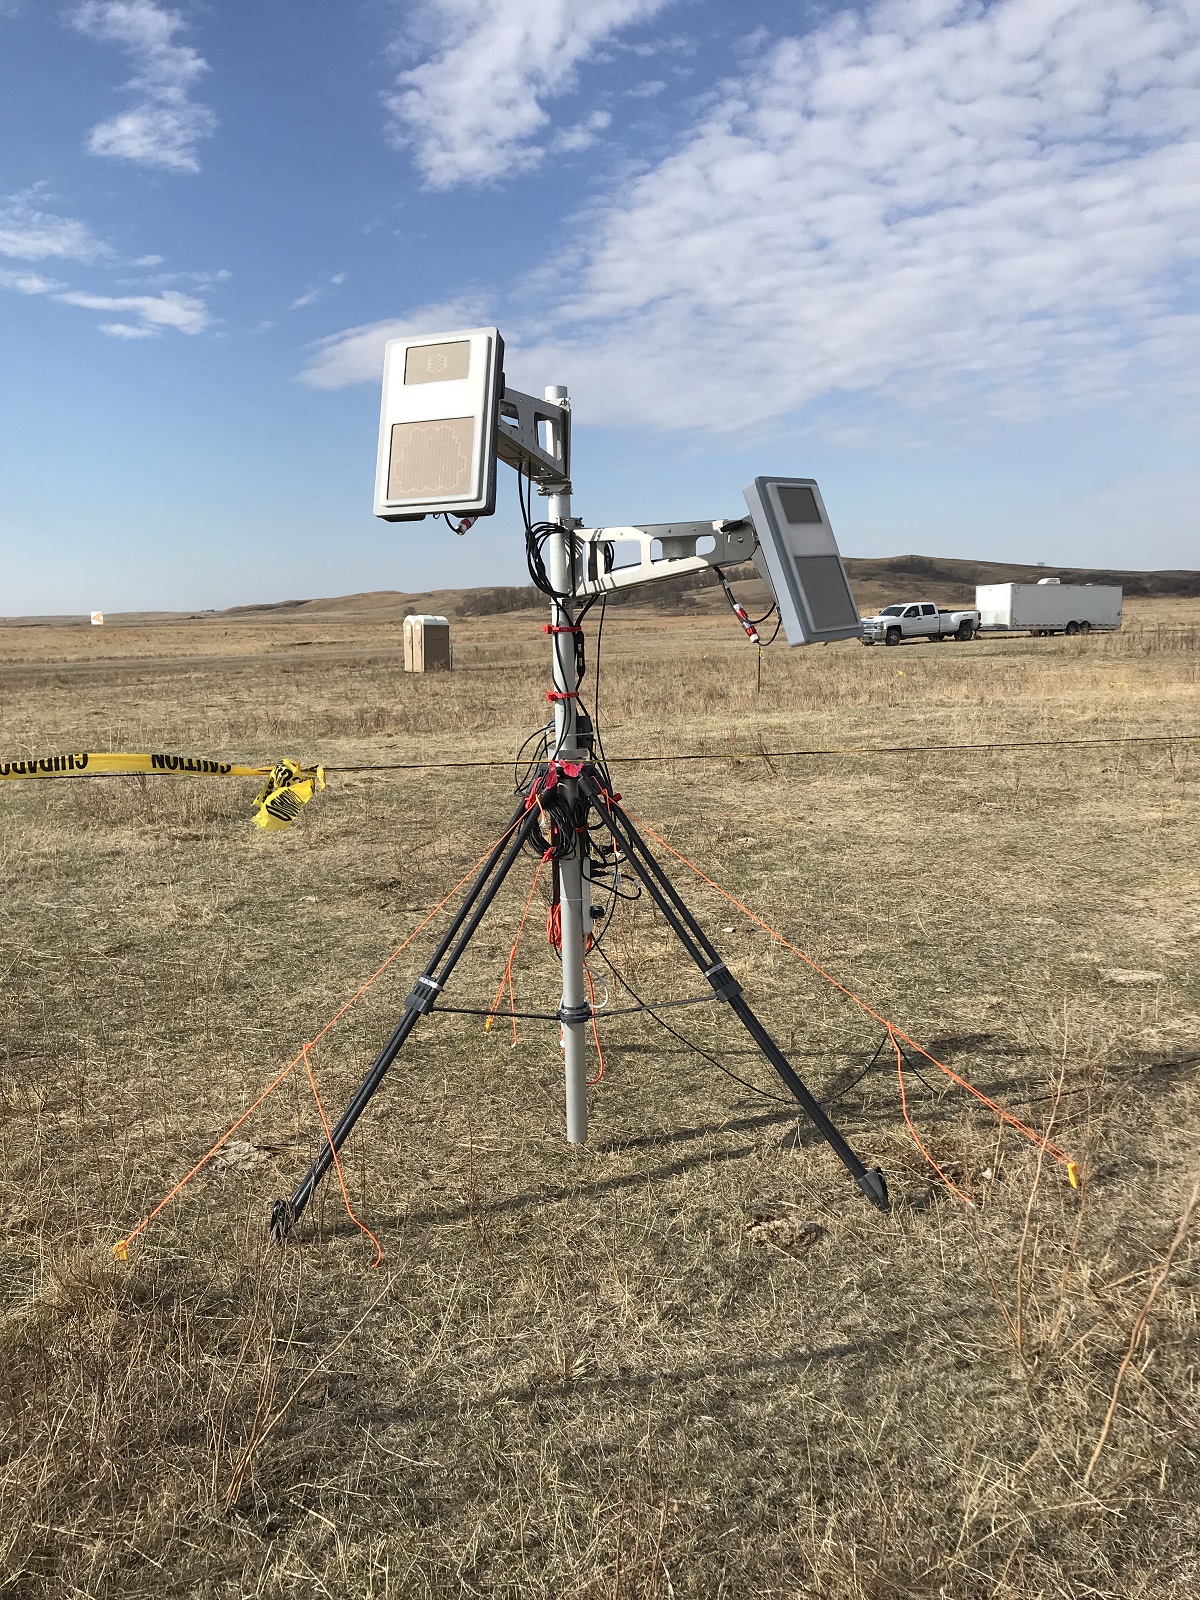 A Fortem Technologies, Inc. radar system, one of several types of technologies tested at Camp Grafton for its ability to detect, track, and identify aerial-based threats.